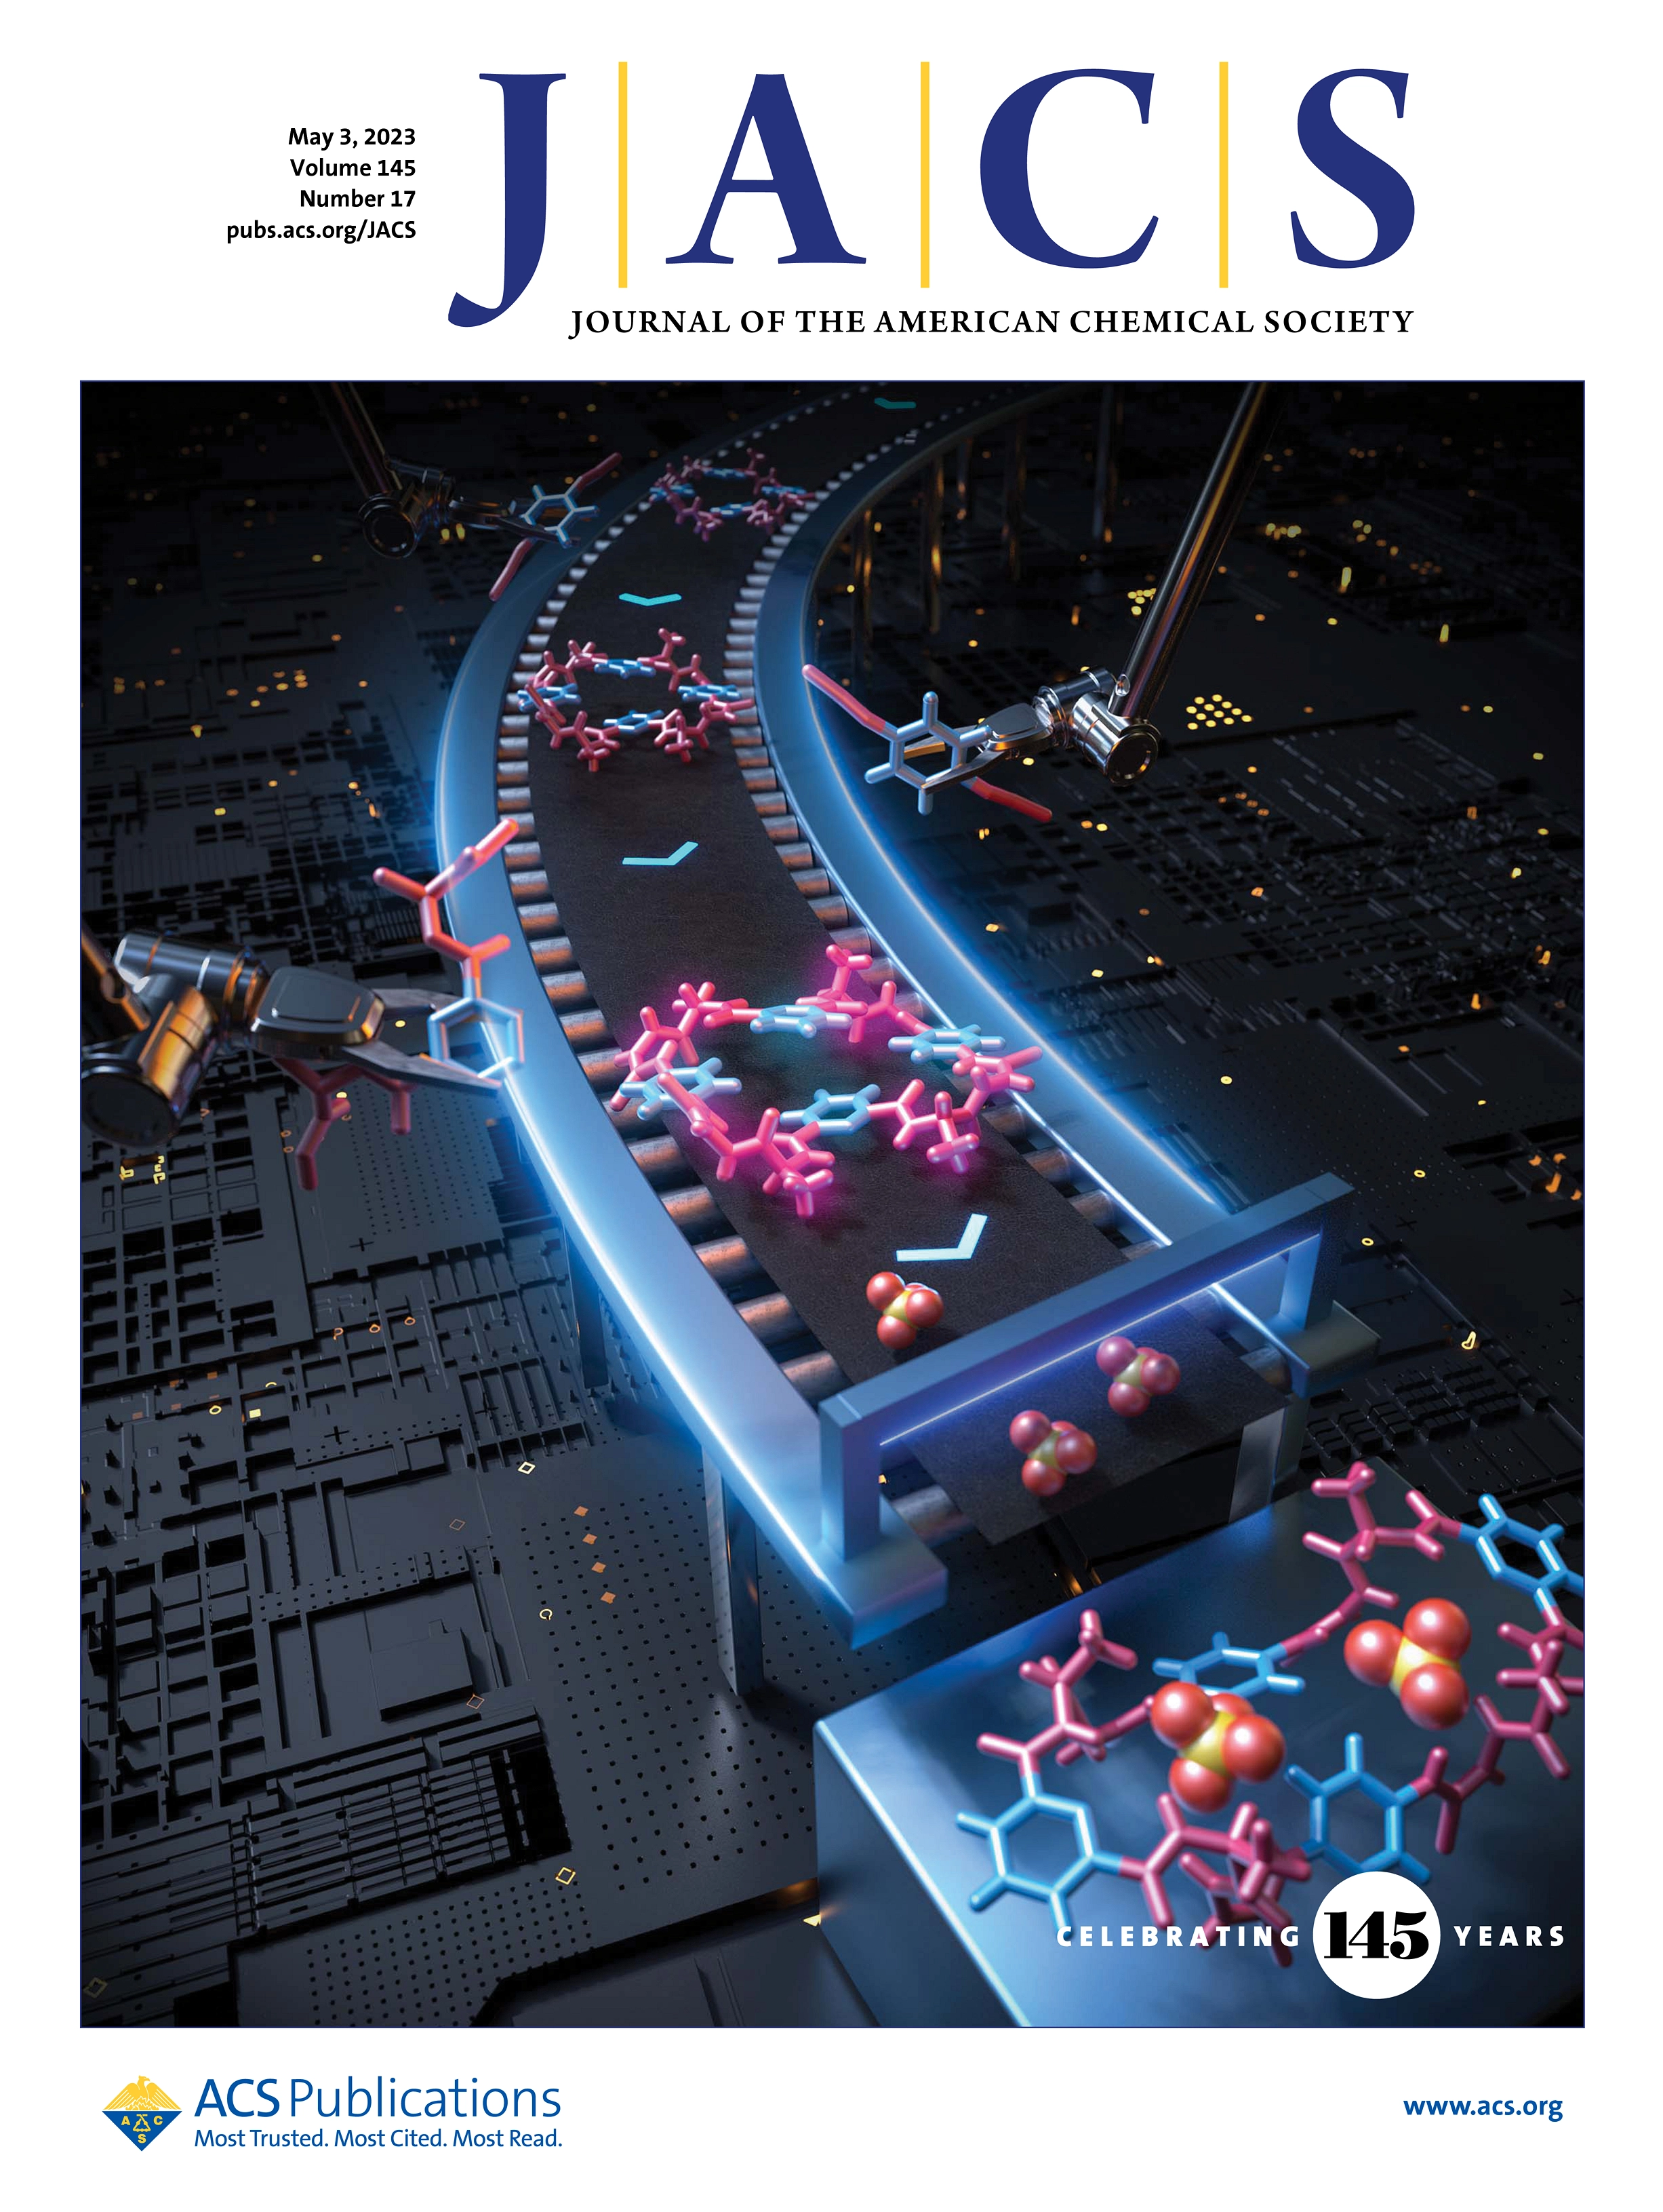 JACS Journal Cover, Volume 145 Issue 17